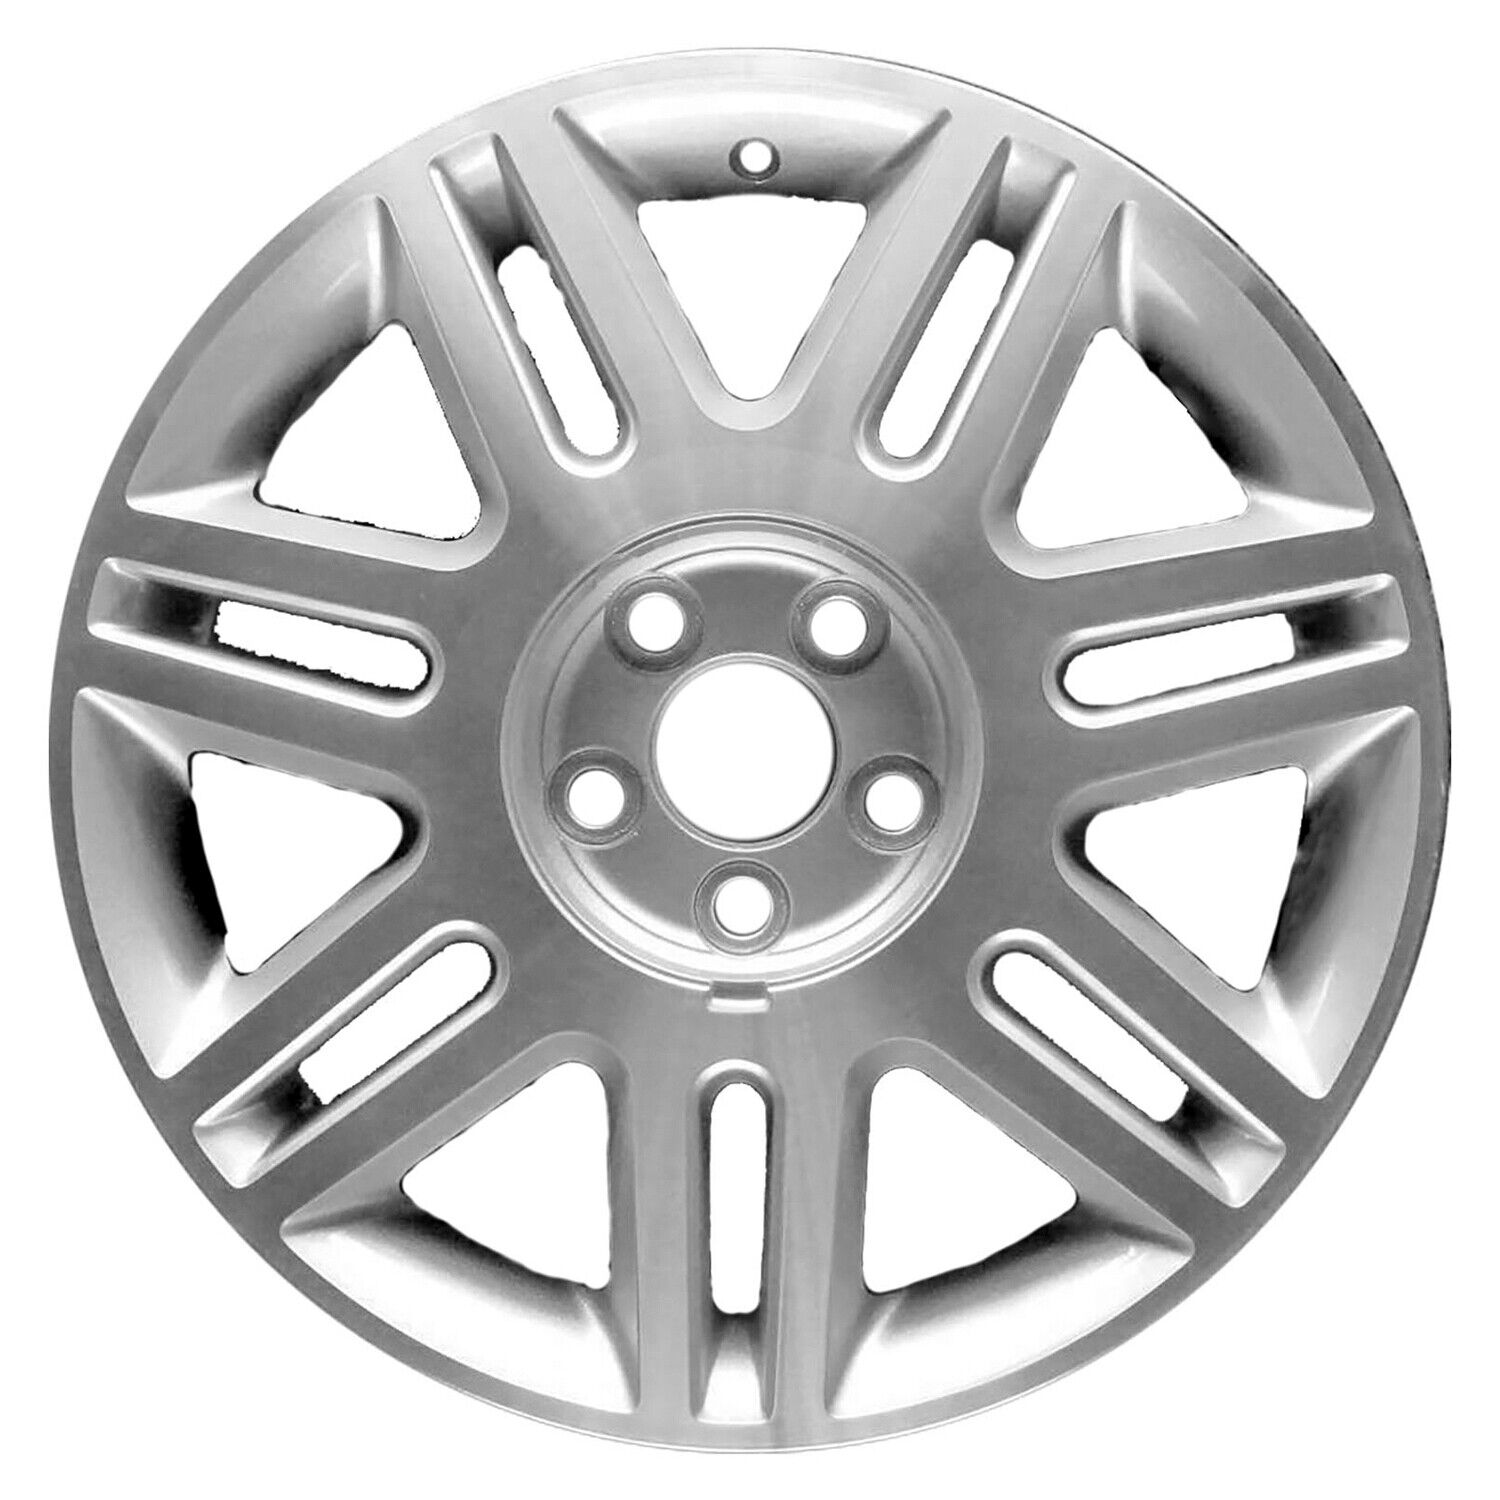 03514 Reconditioned OEM Aluminum Wheel 17x7.5 fits 2003-2005 Lincoln LS